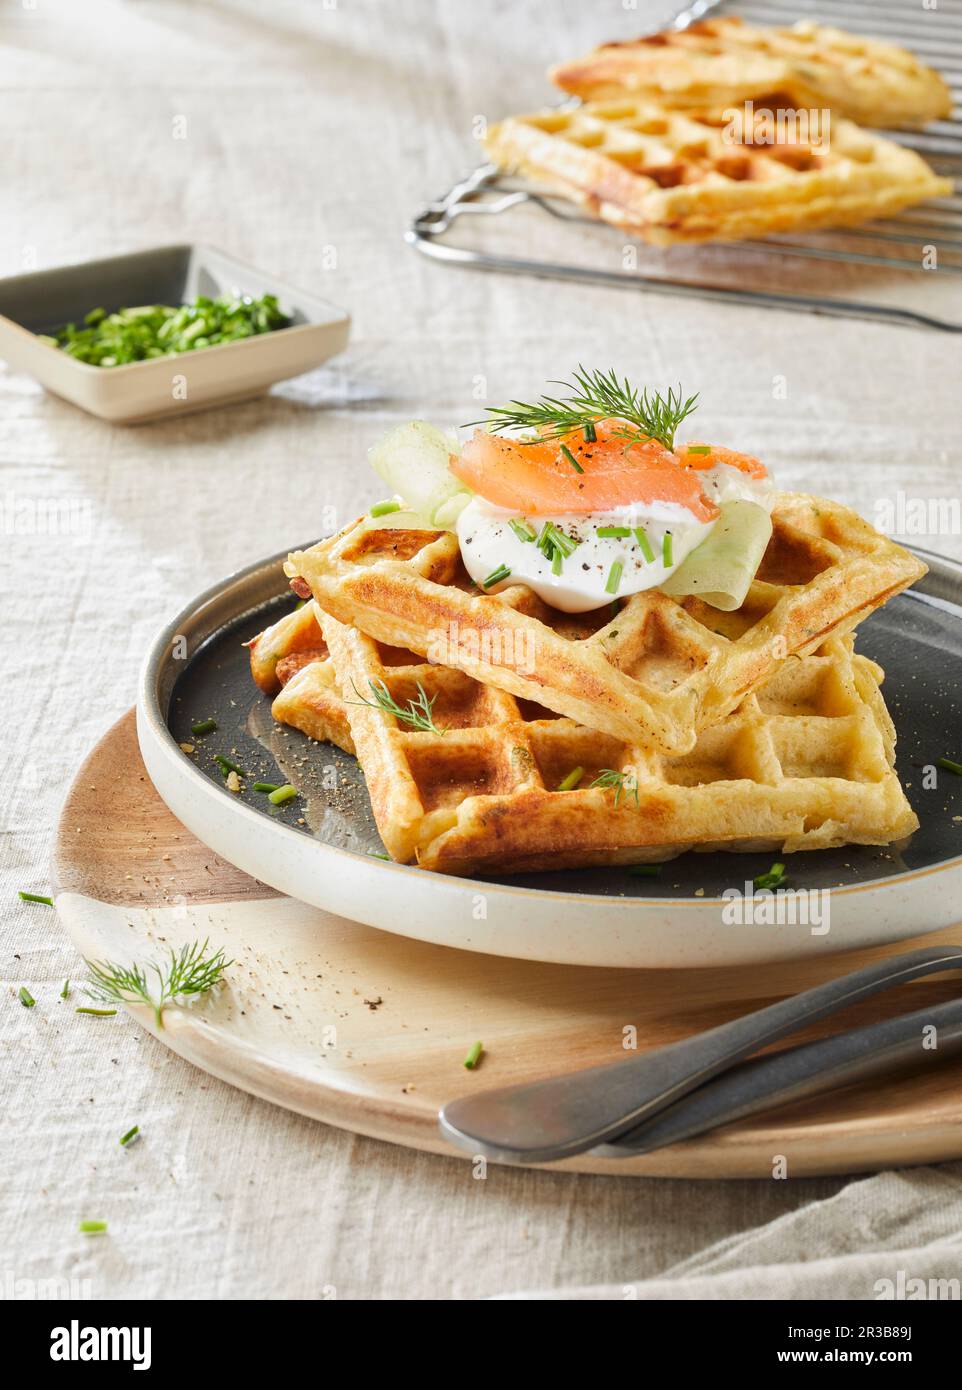 Potato waffles with salmon, sour cream, cucumber, dill and chives Stock Photo